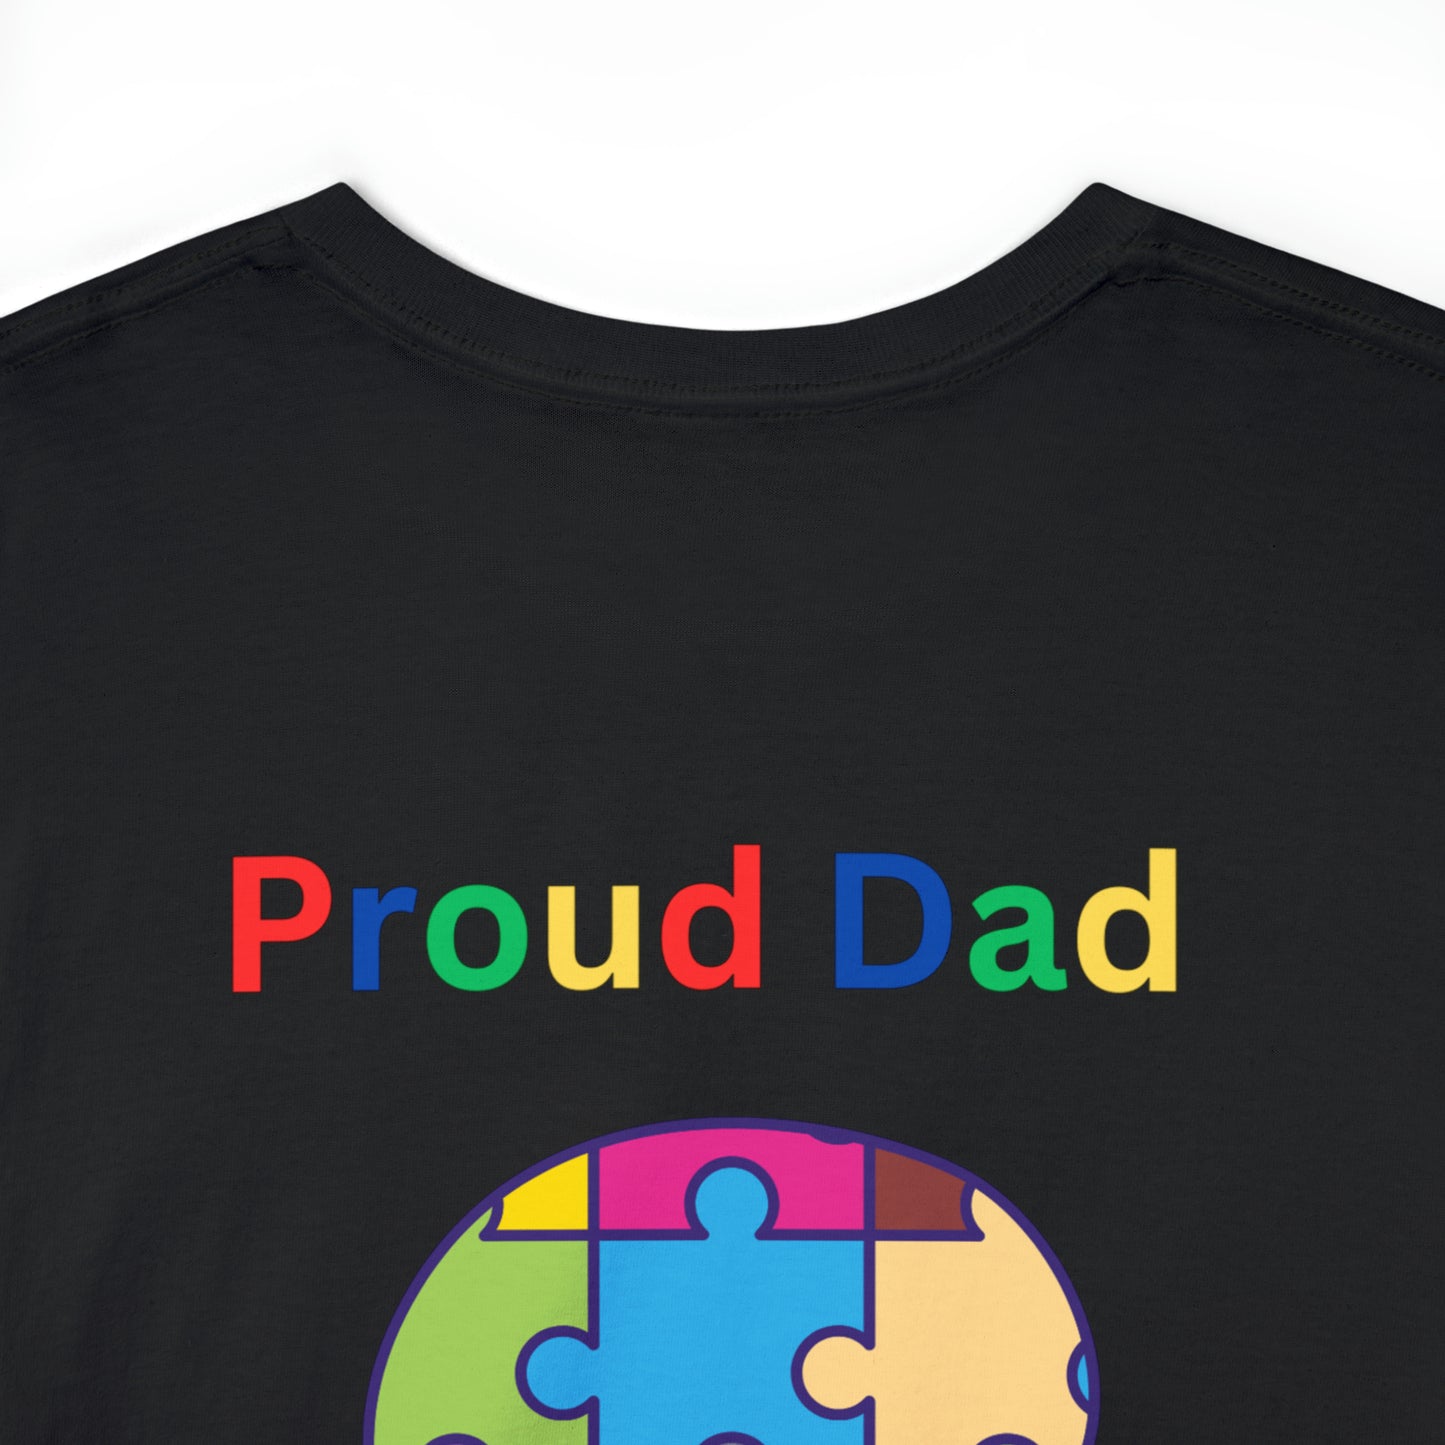 Proud Dad of Someone with Autism